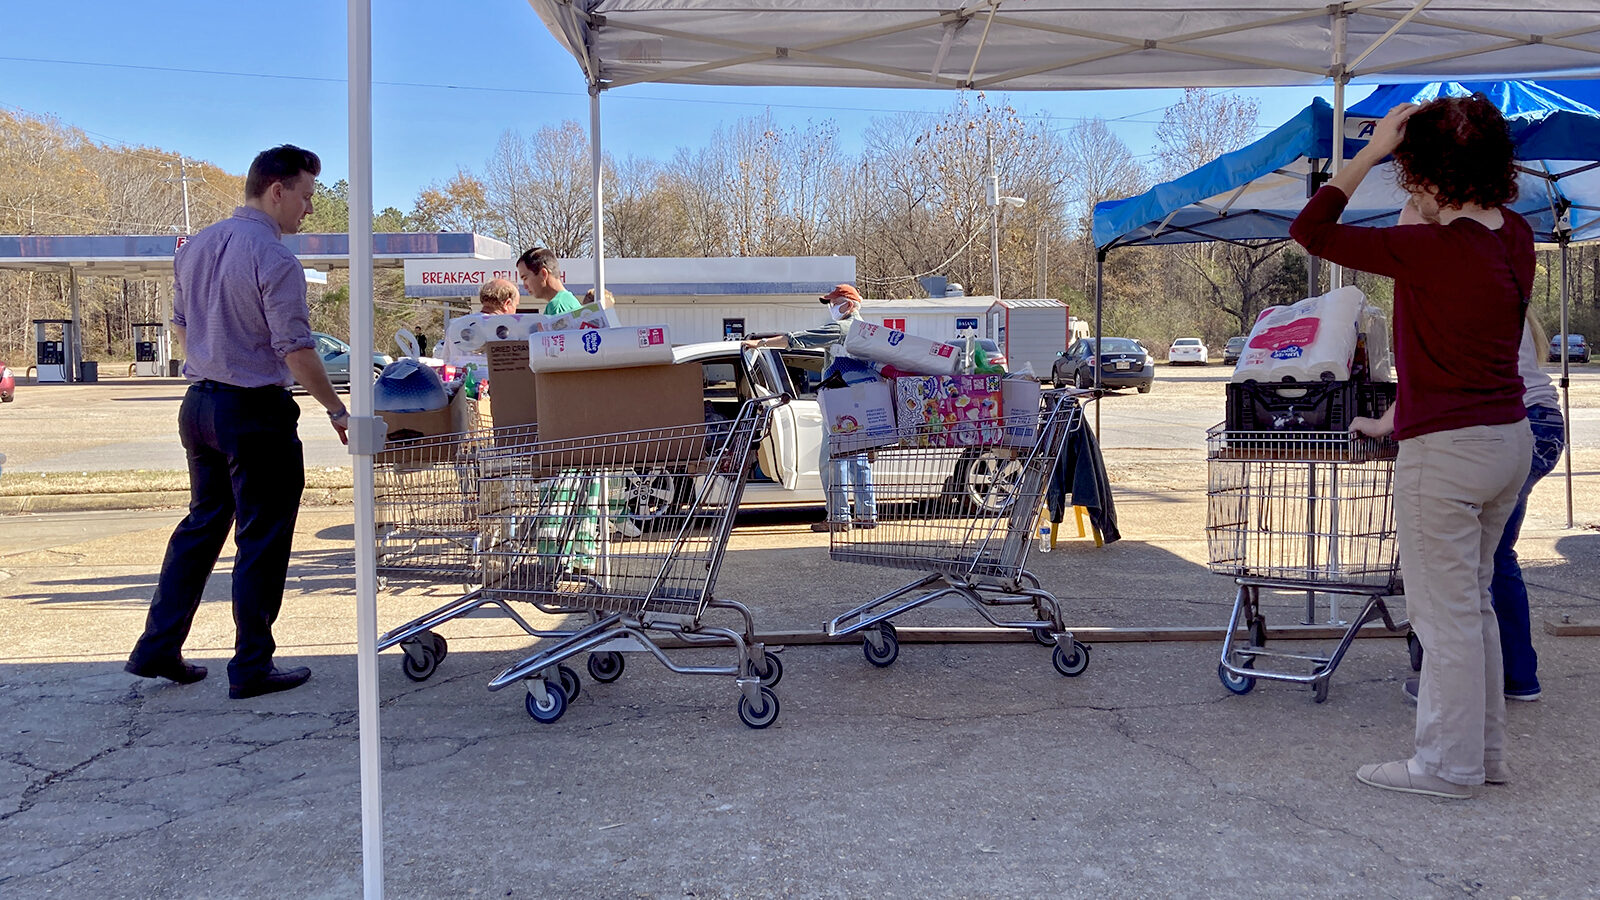 Two volunteers at Saint Luke’s Food Pantry in Tupelo, Mississippi prepare shopping carts full of food and supplies to donate to families in need on Thursday, Dec. 2, 2021.